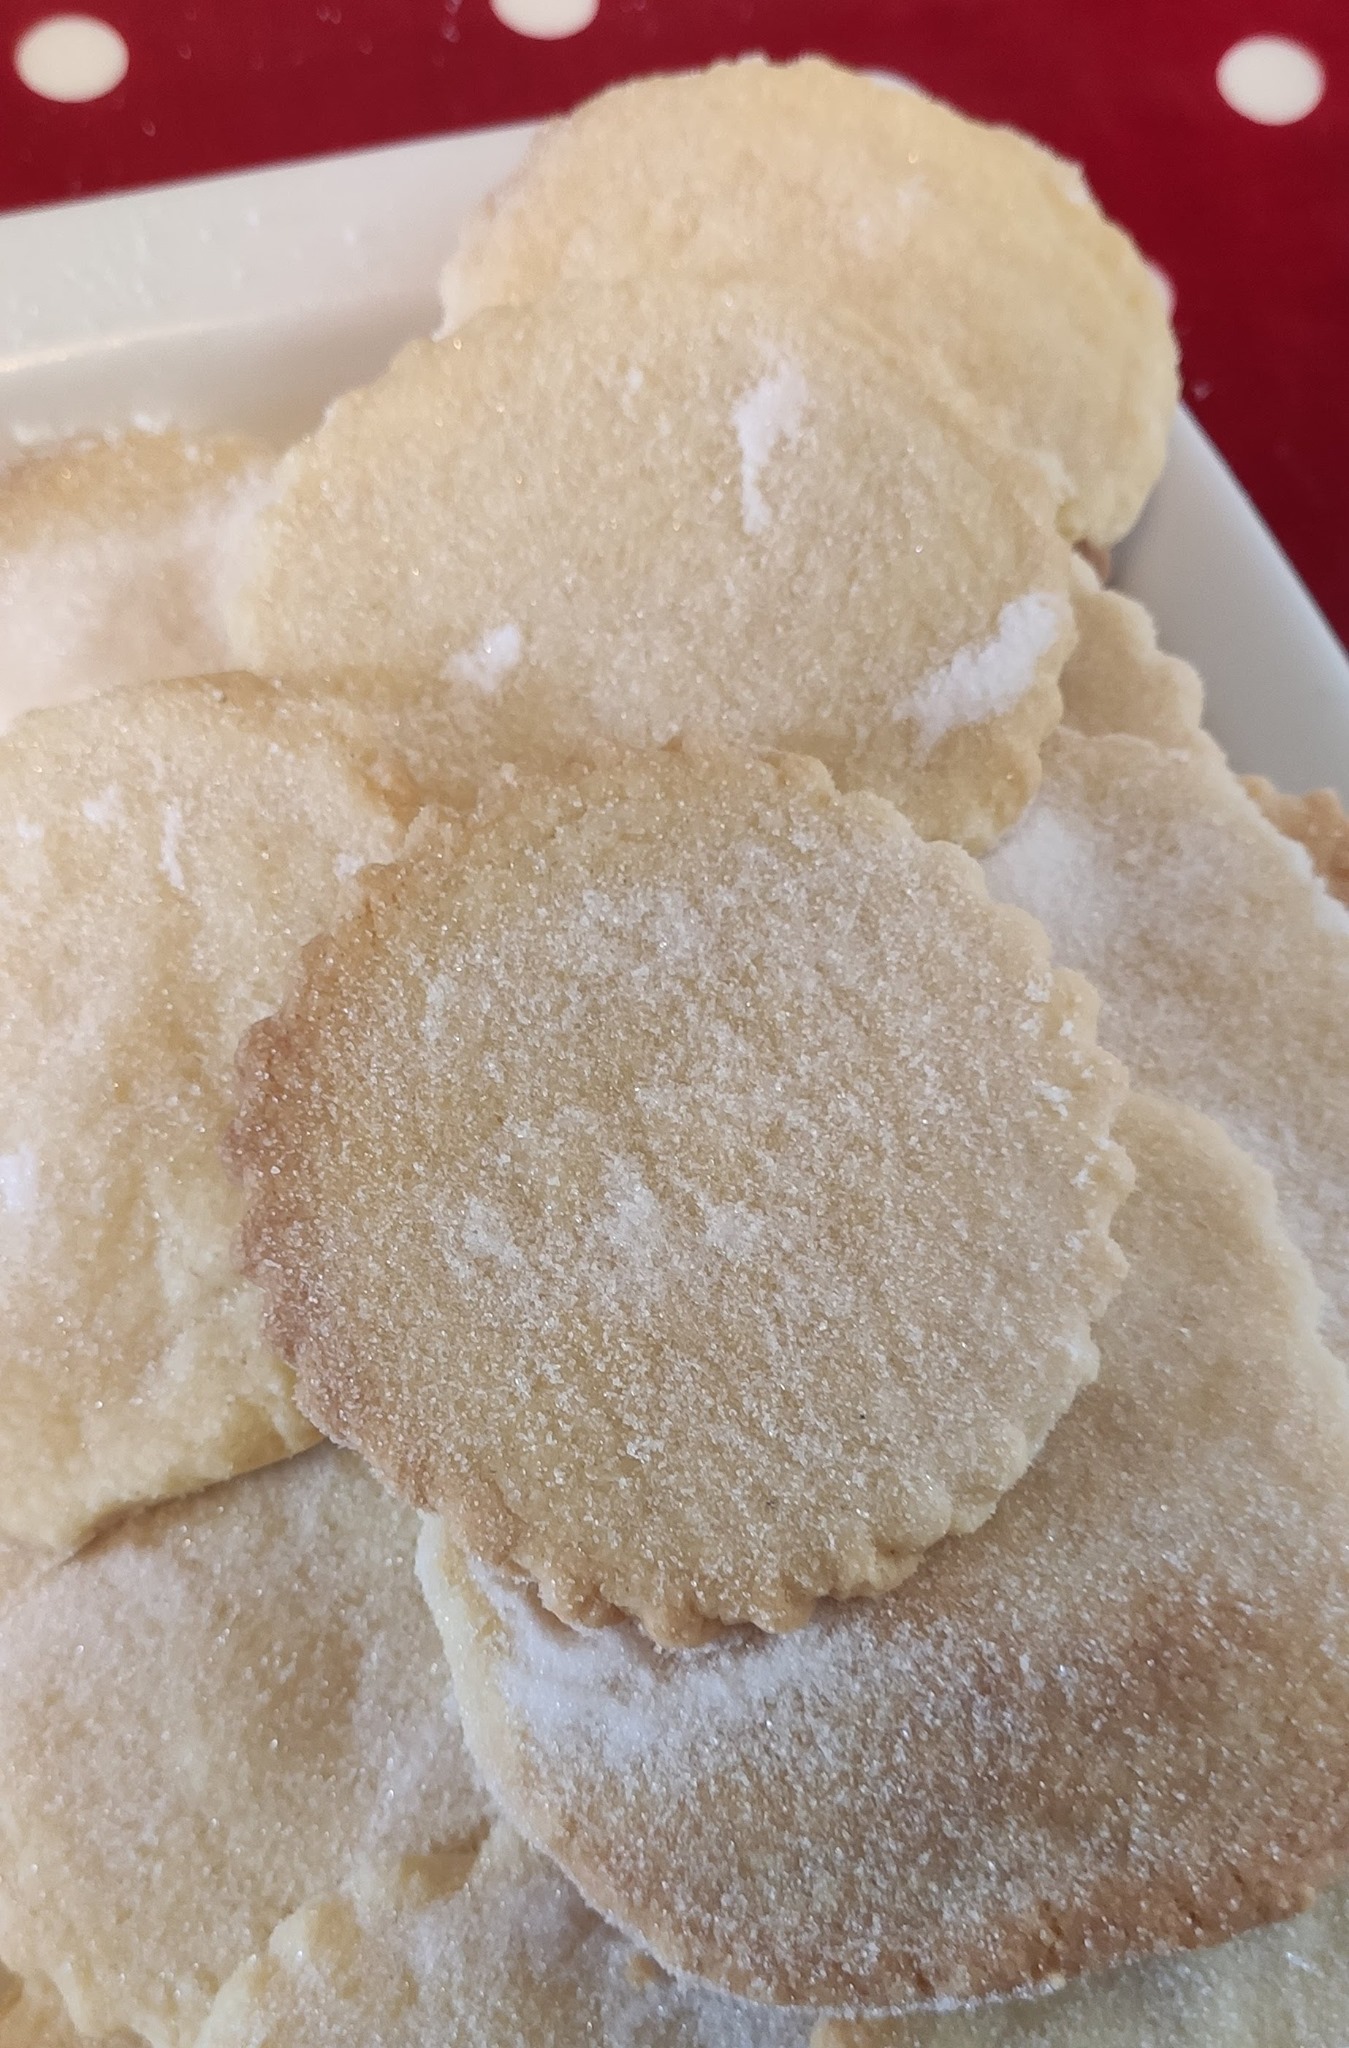 A pile of sugar covered shortbread biscuits.